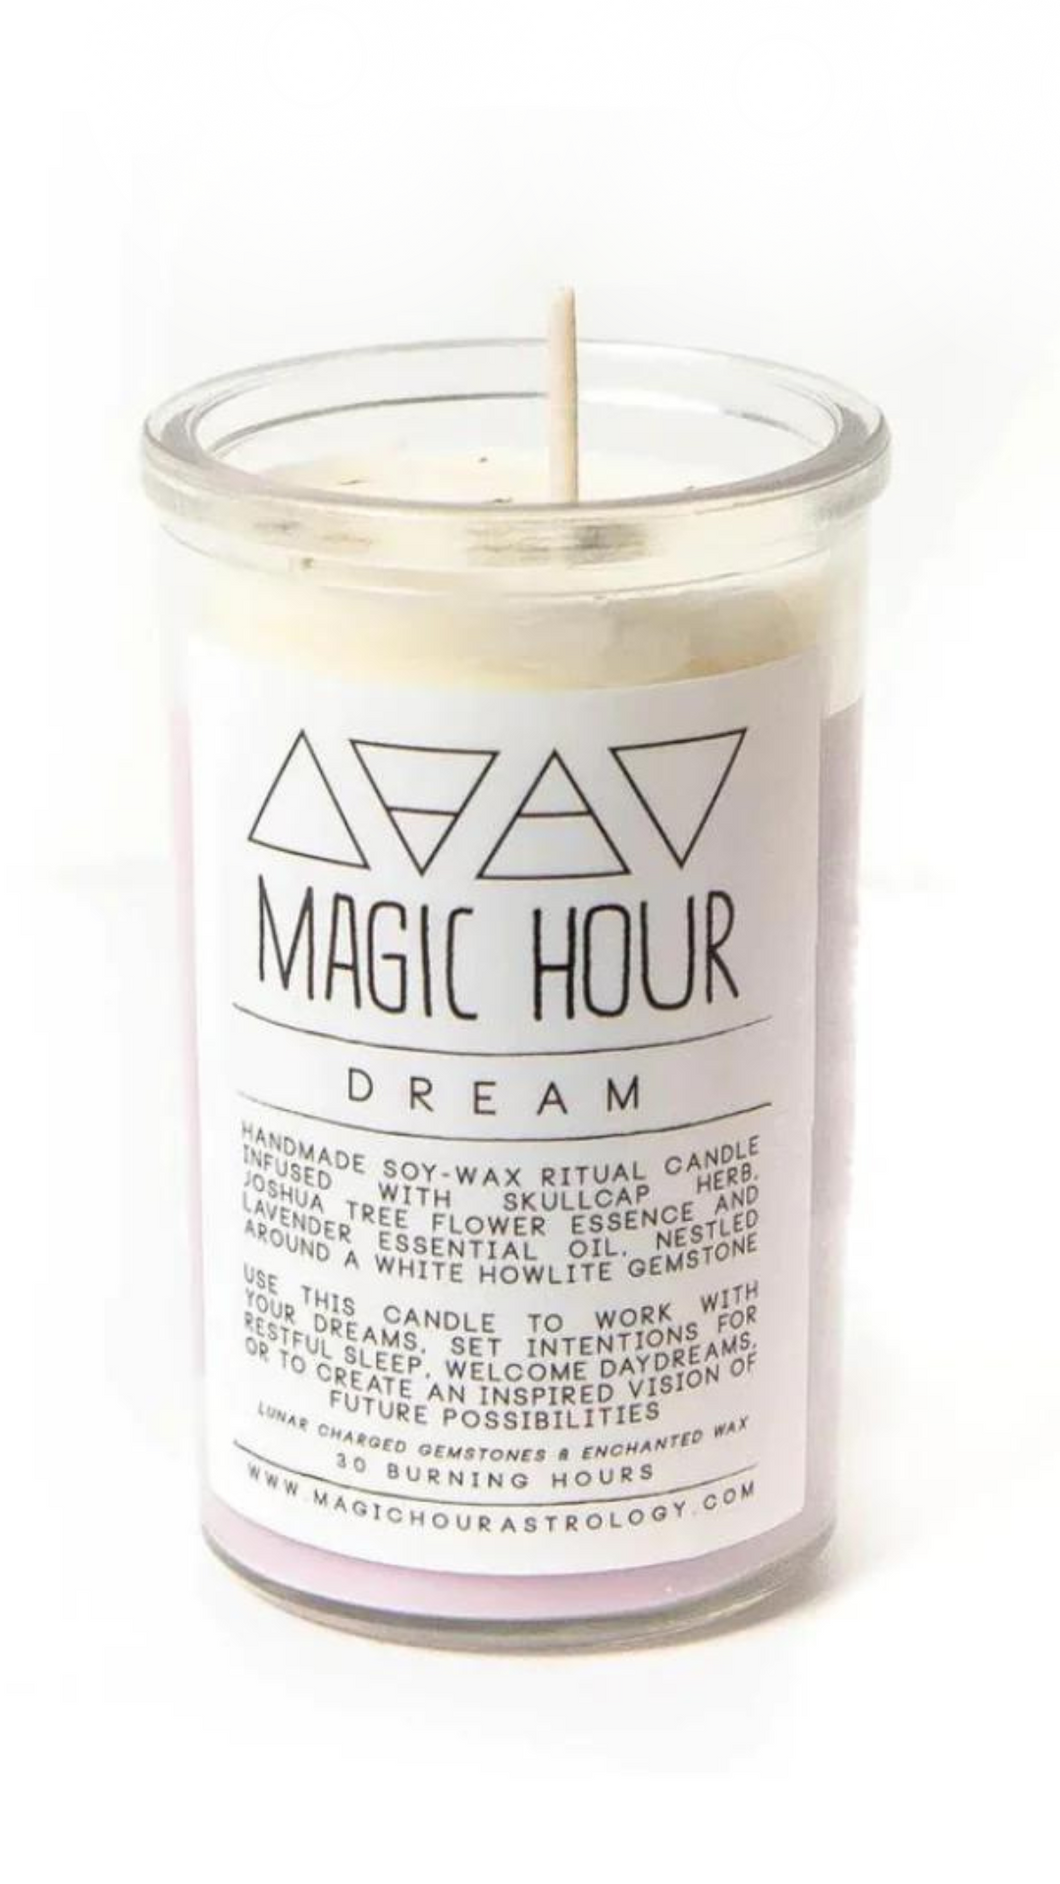 Dream Ritual Candle by Magic Hour